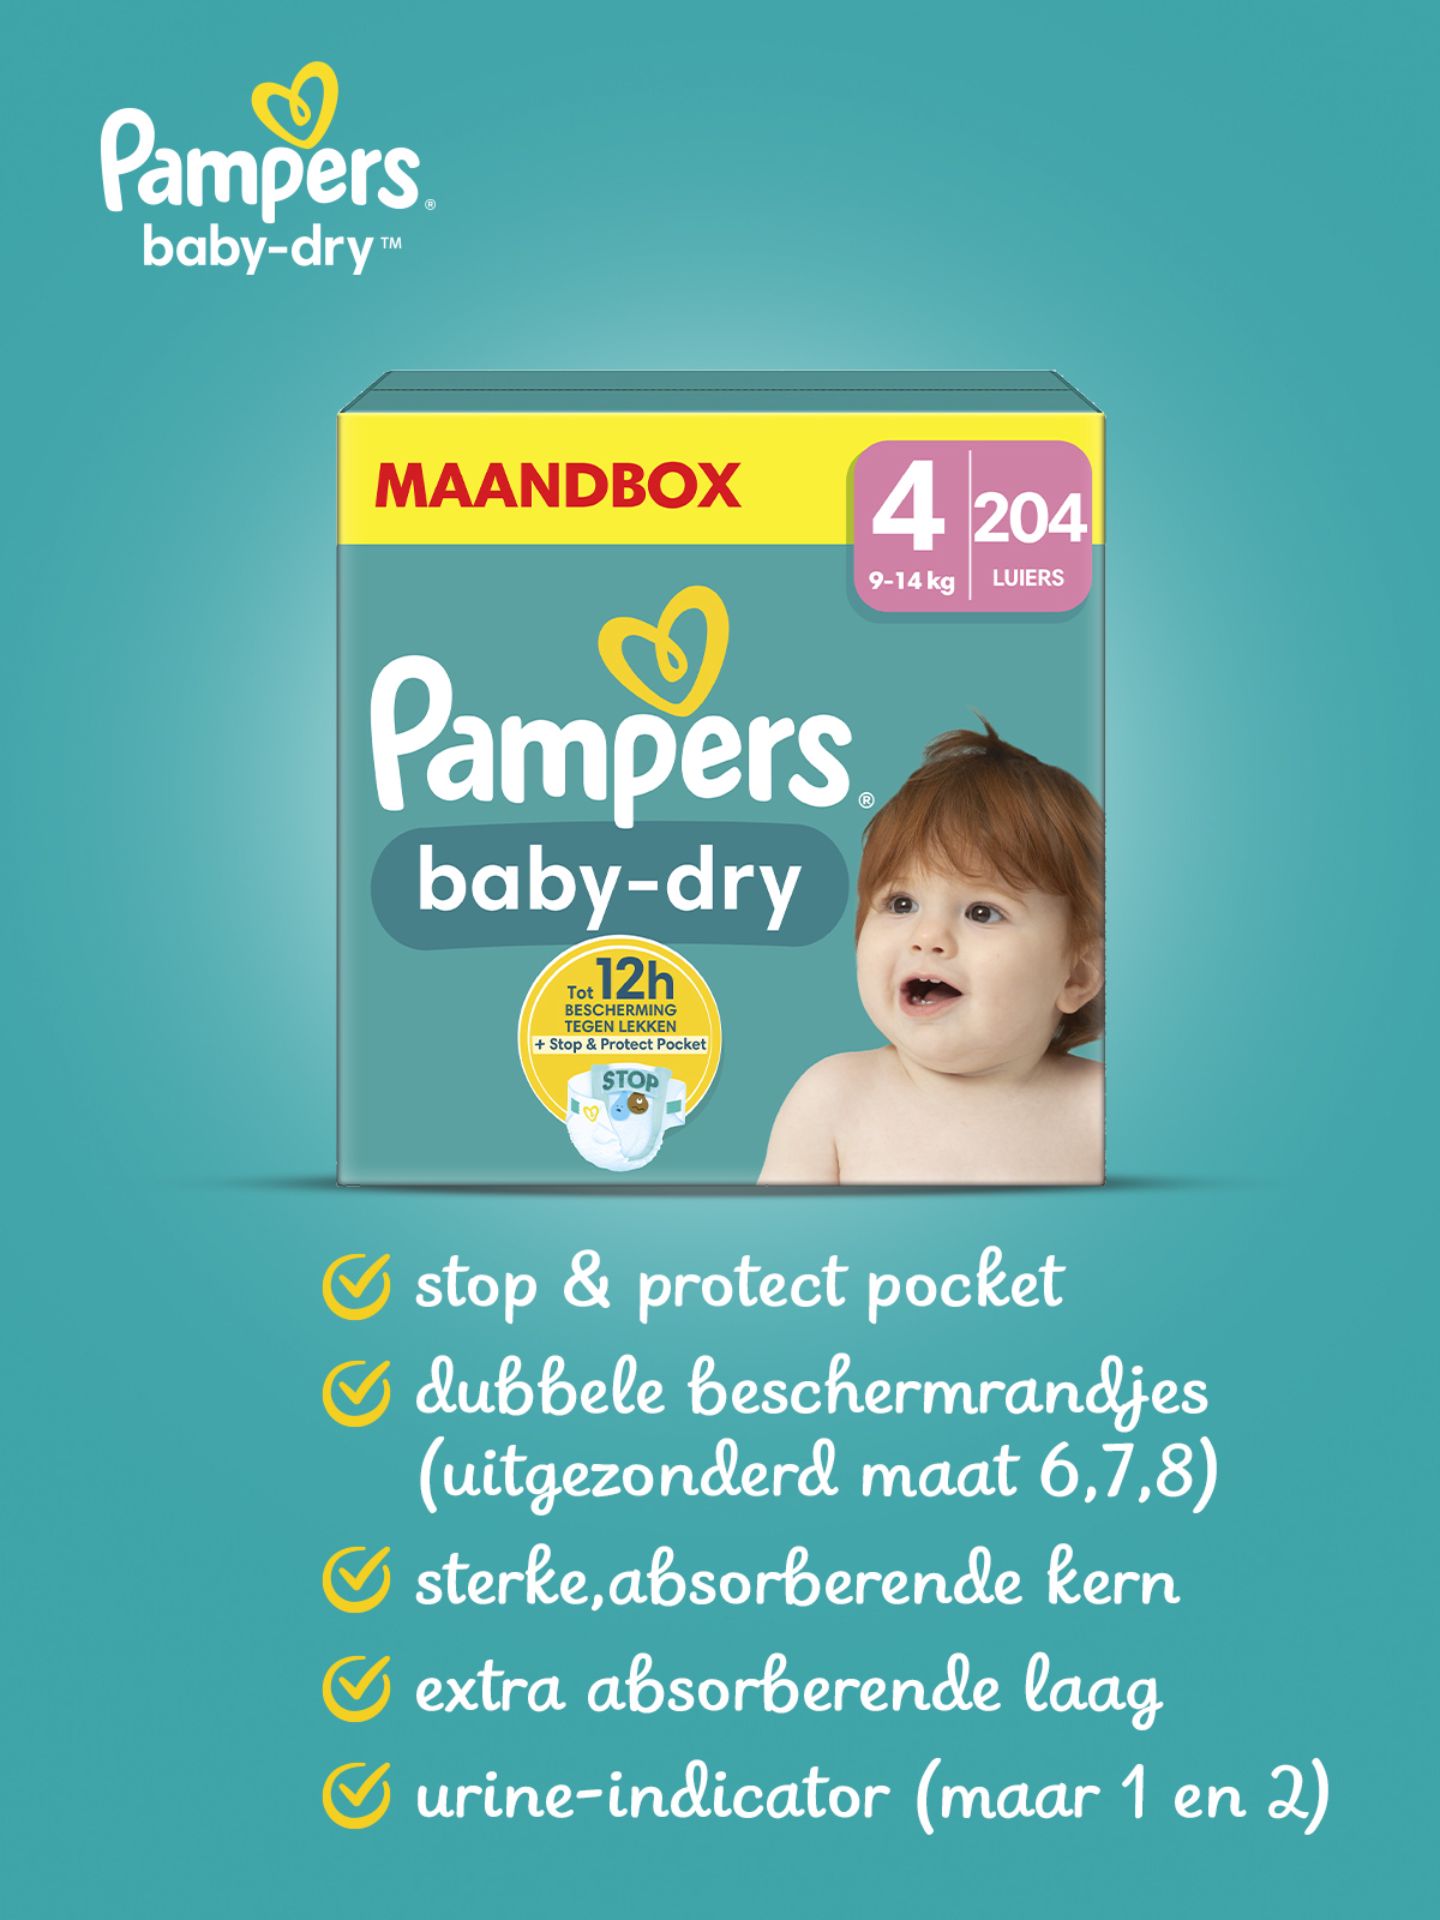 3x_Pampers_online_banners_1200x1600px_BABY-DRY.JPG